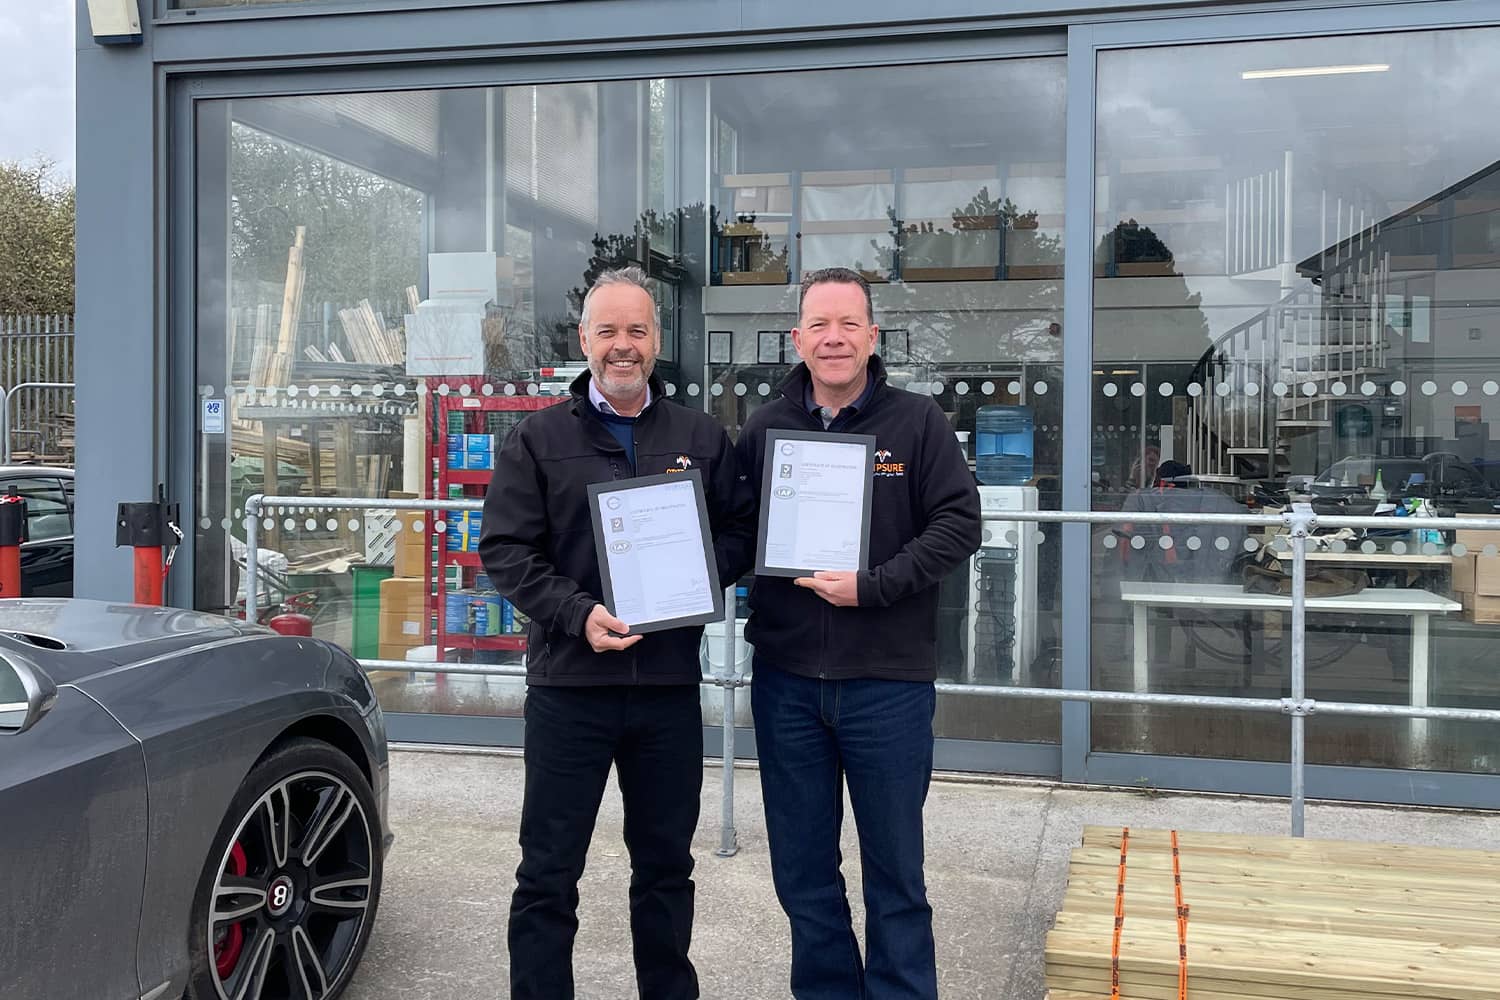 Mike Nicholson and Robin Olver celebrate double ISO accreditation